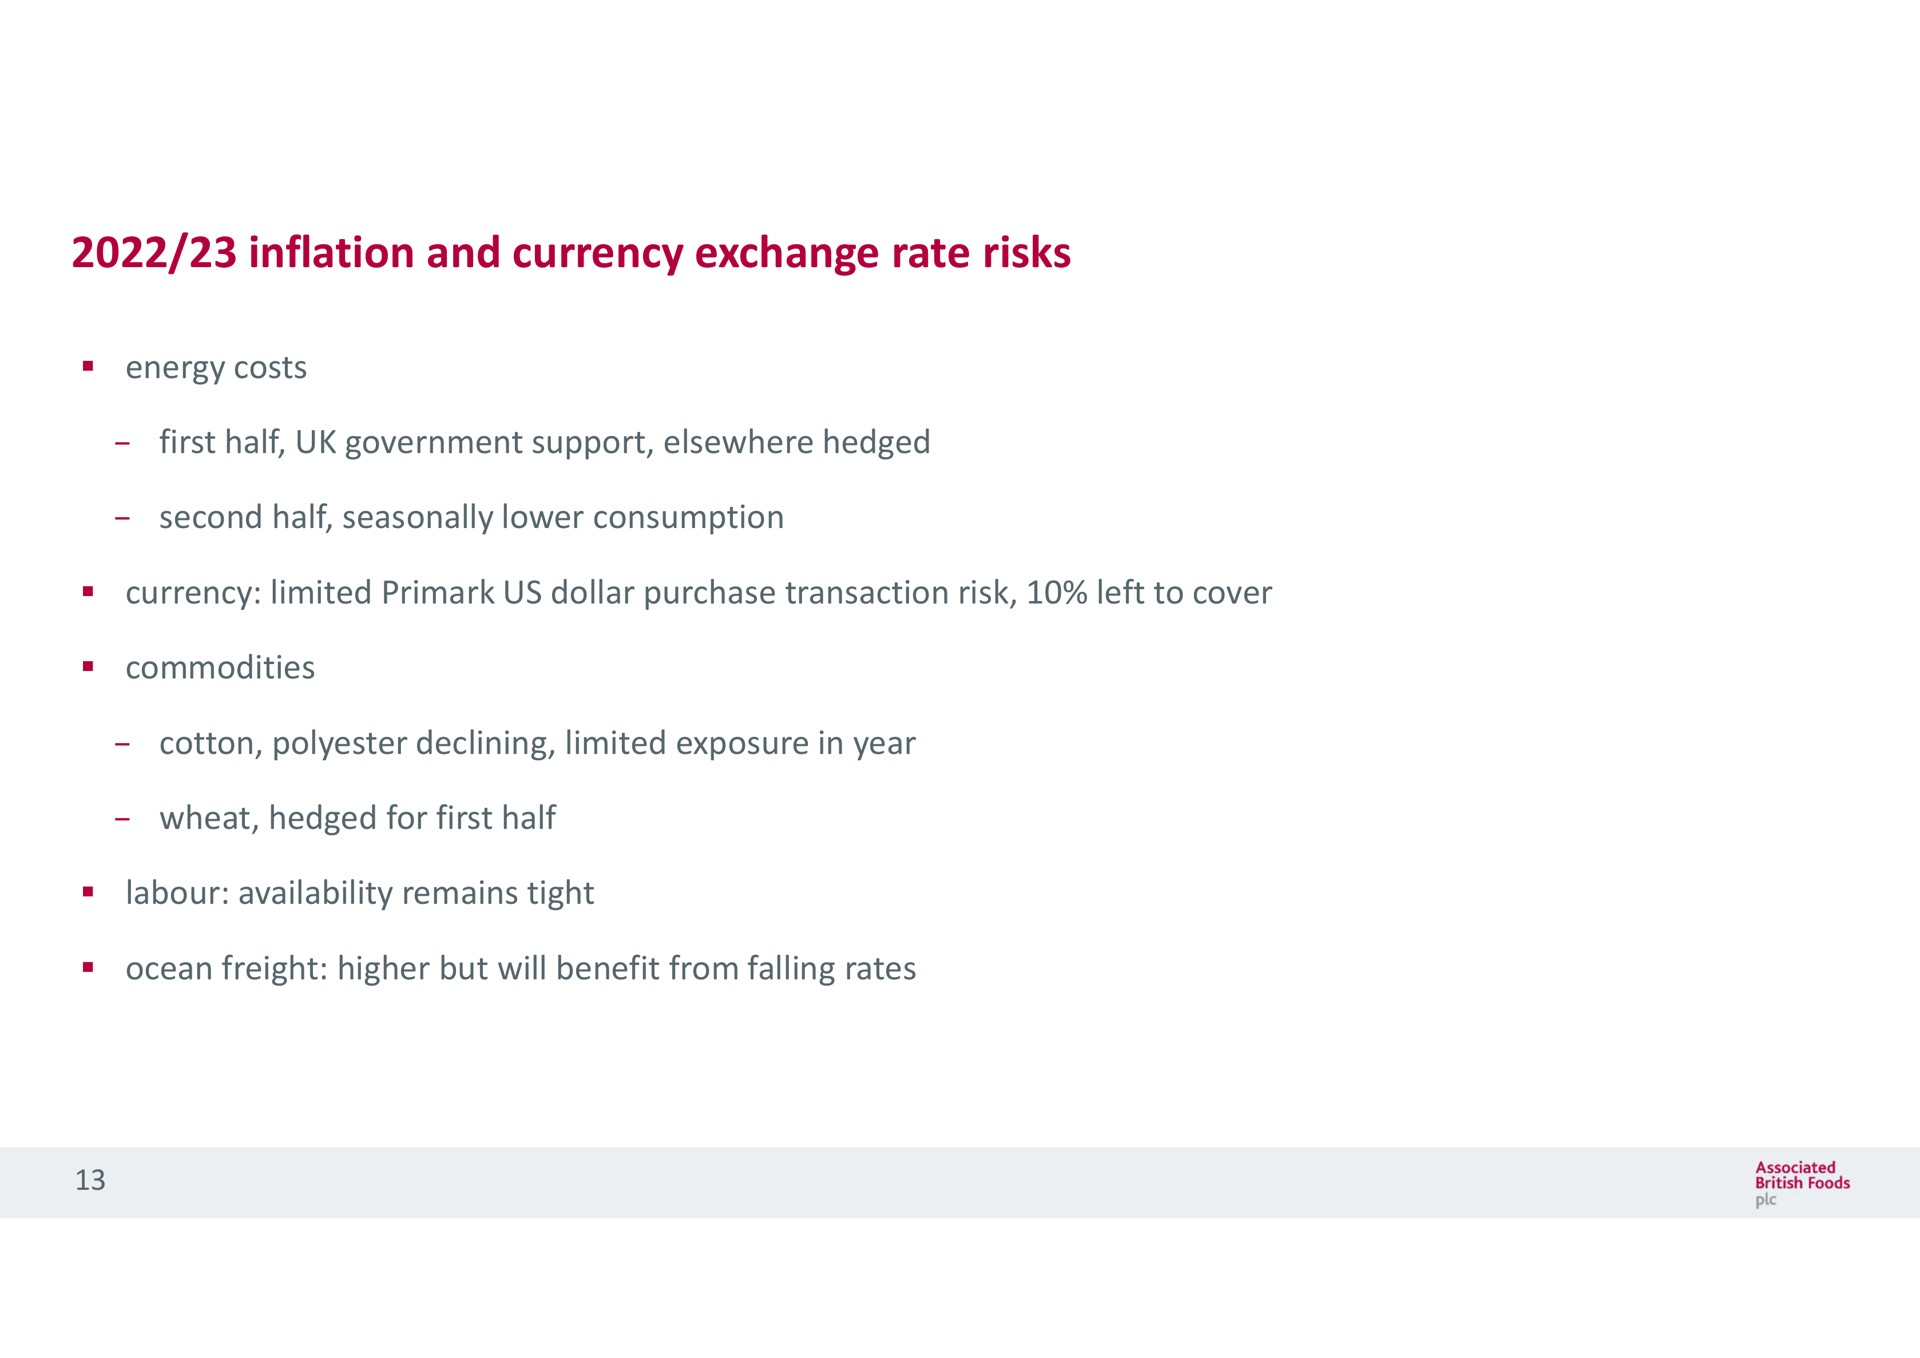 inflation and currency exchange rate risks energy costs | Associated British Foods